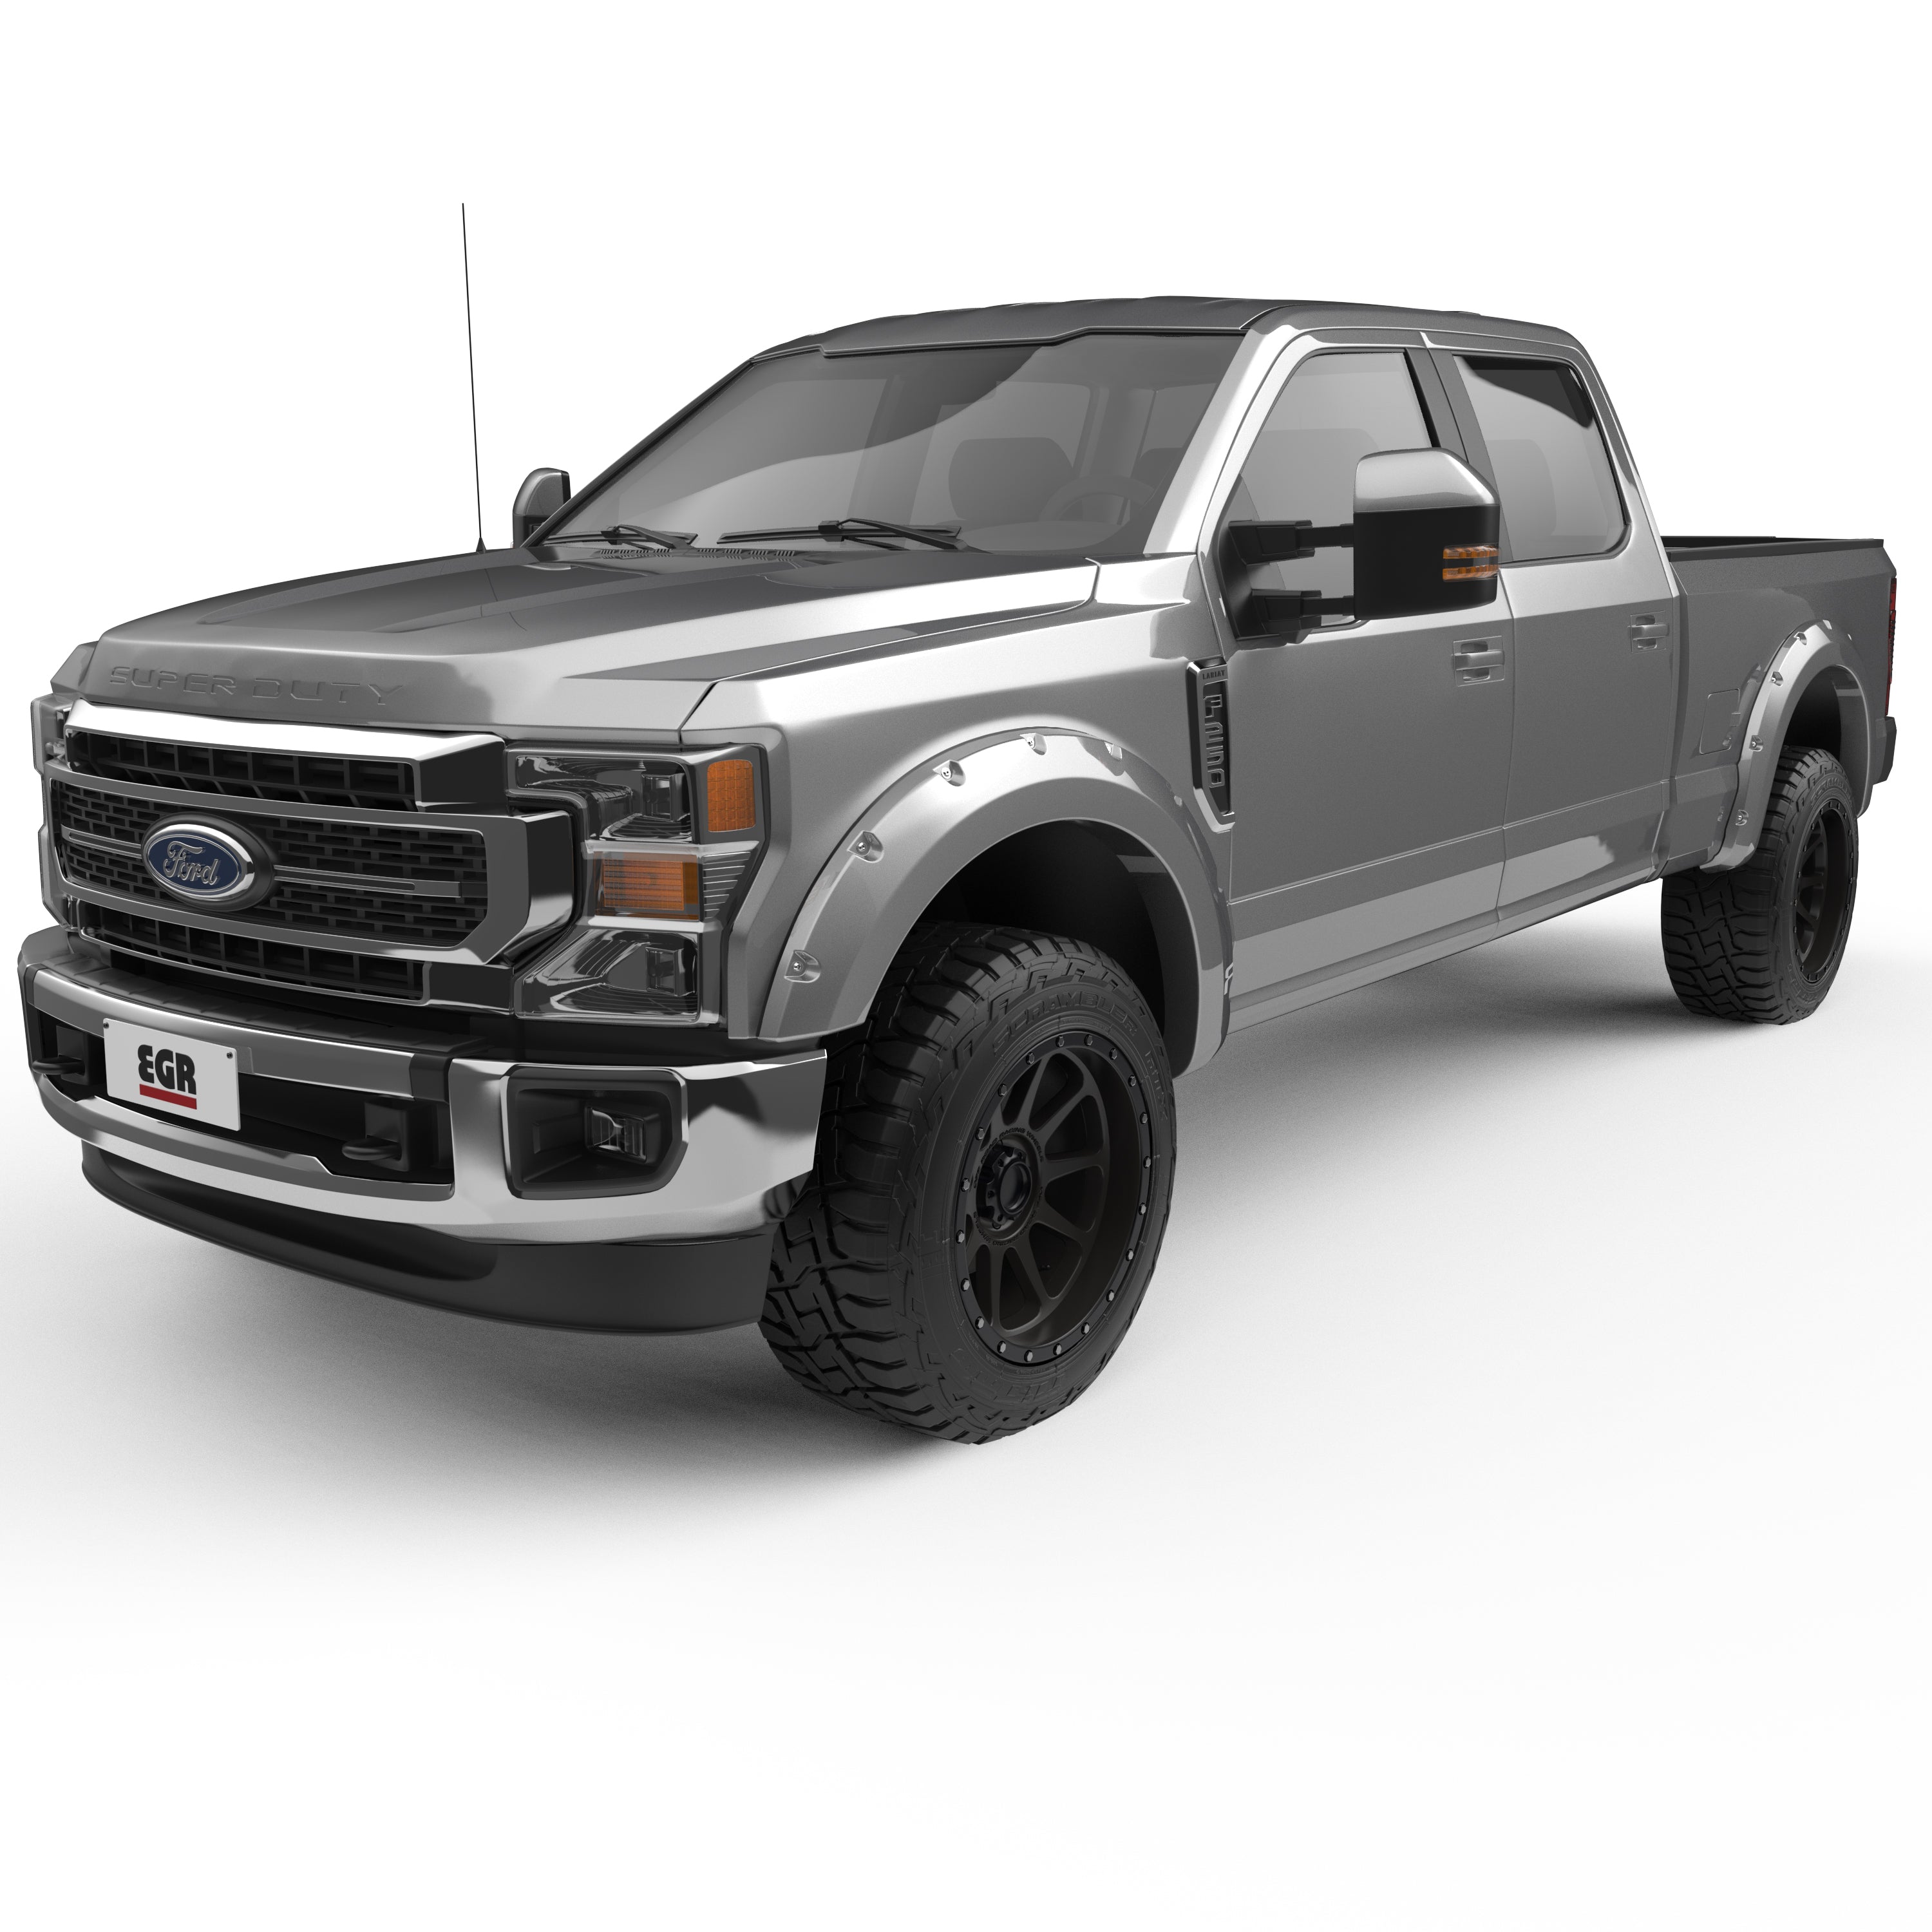 EGR 2011-2016 Ford F-250 F-350 Super Duty Extended Crew Standard Cab Pickup 2Door 4Door Painted To Code Ingot Silver Traditional Bolt-On Look Fender Flares 793814-UX